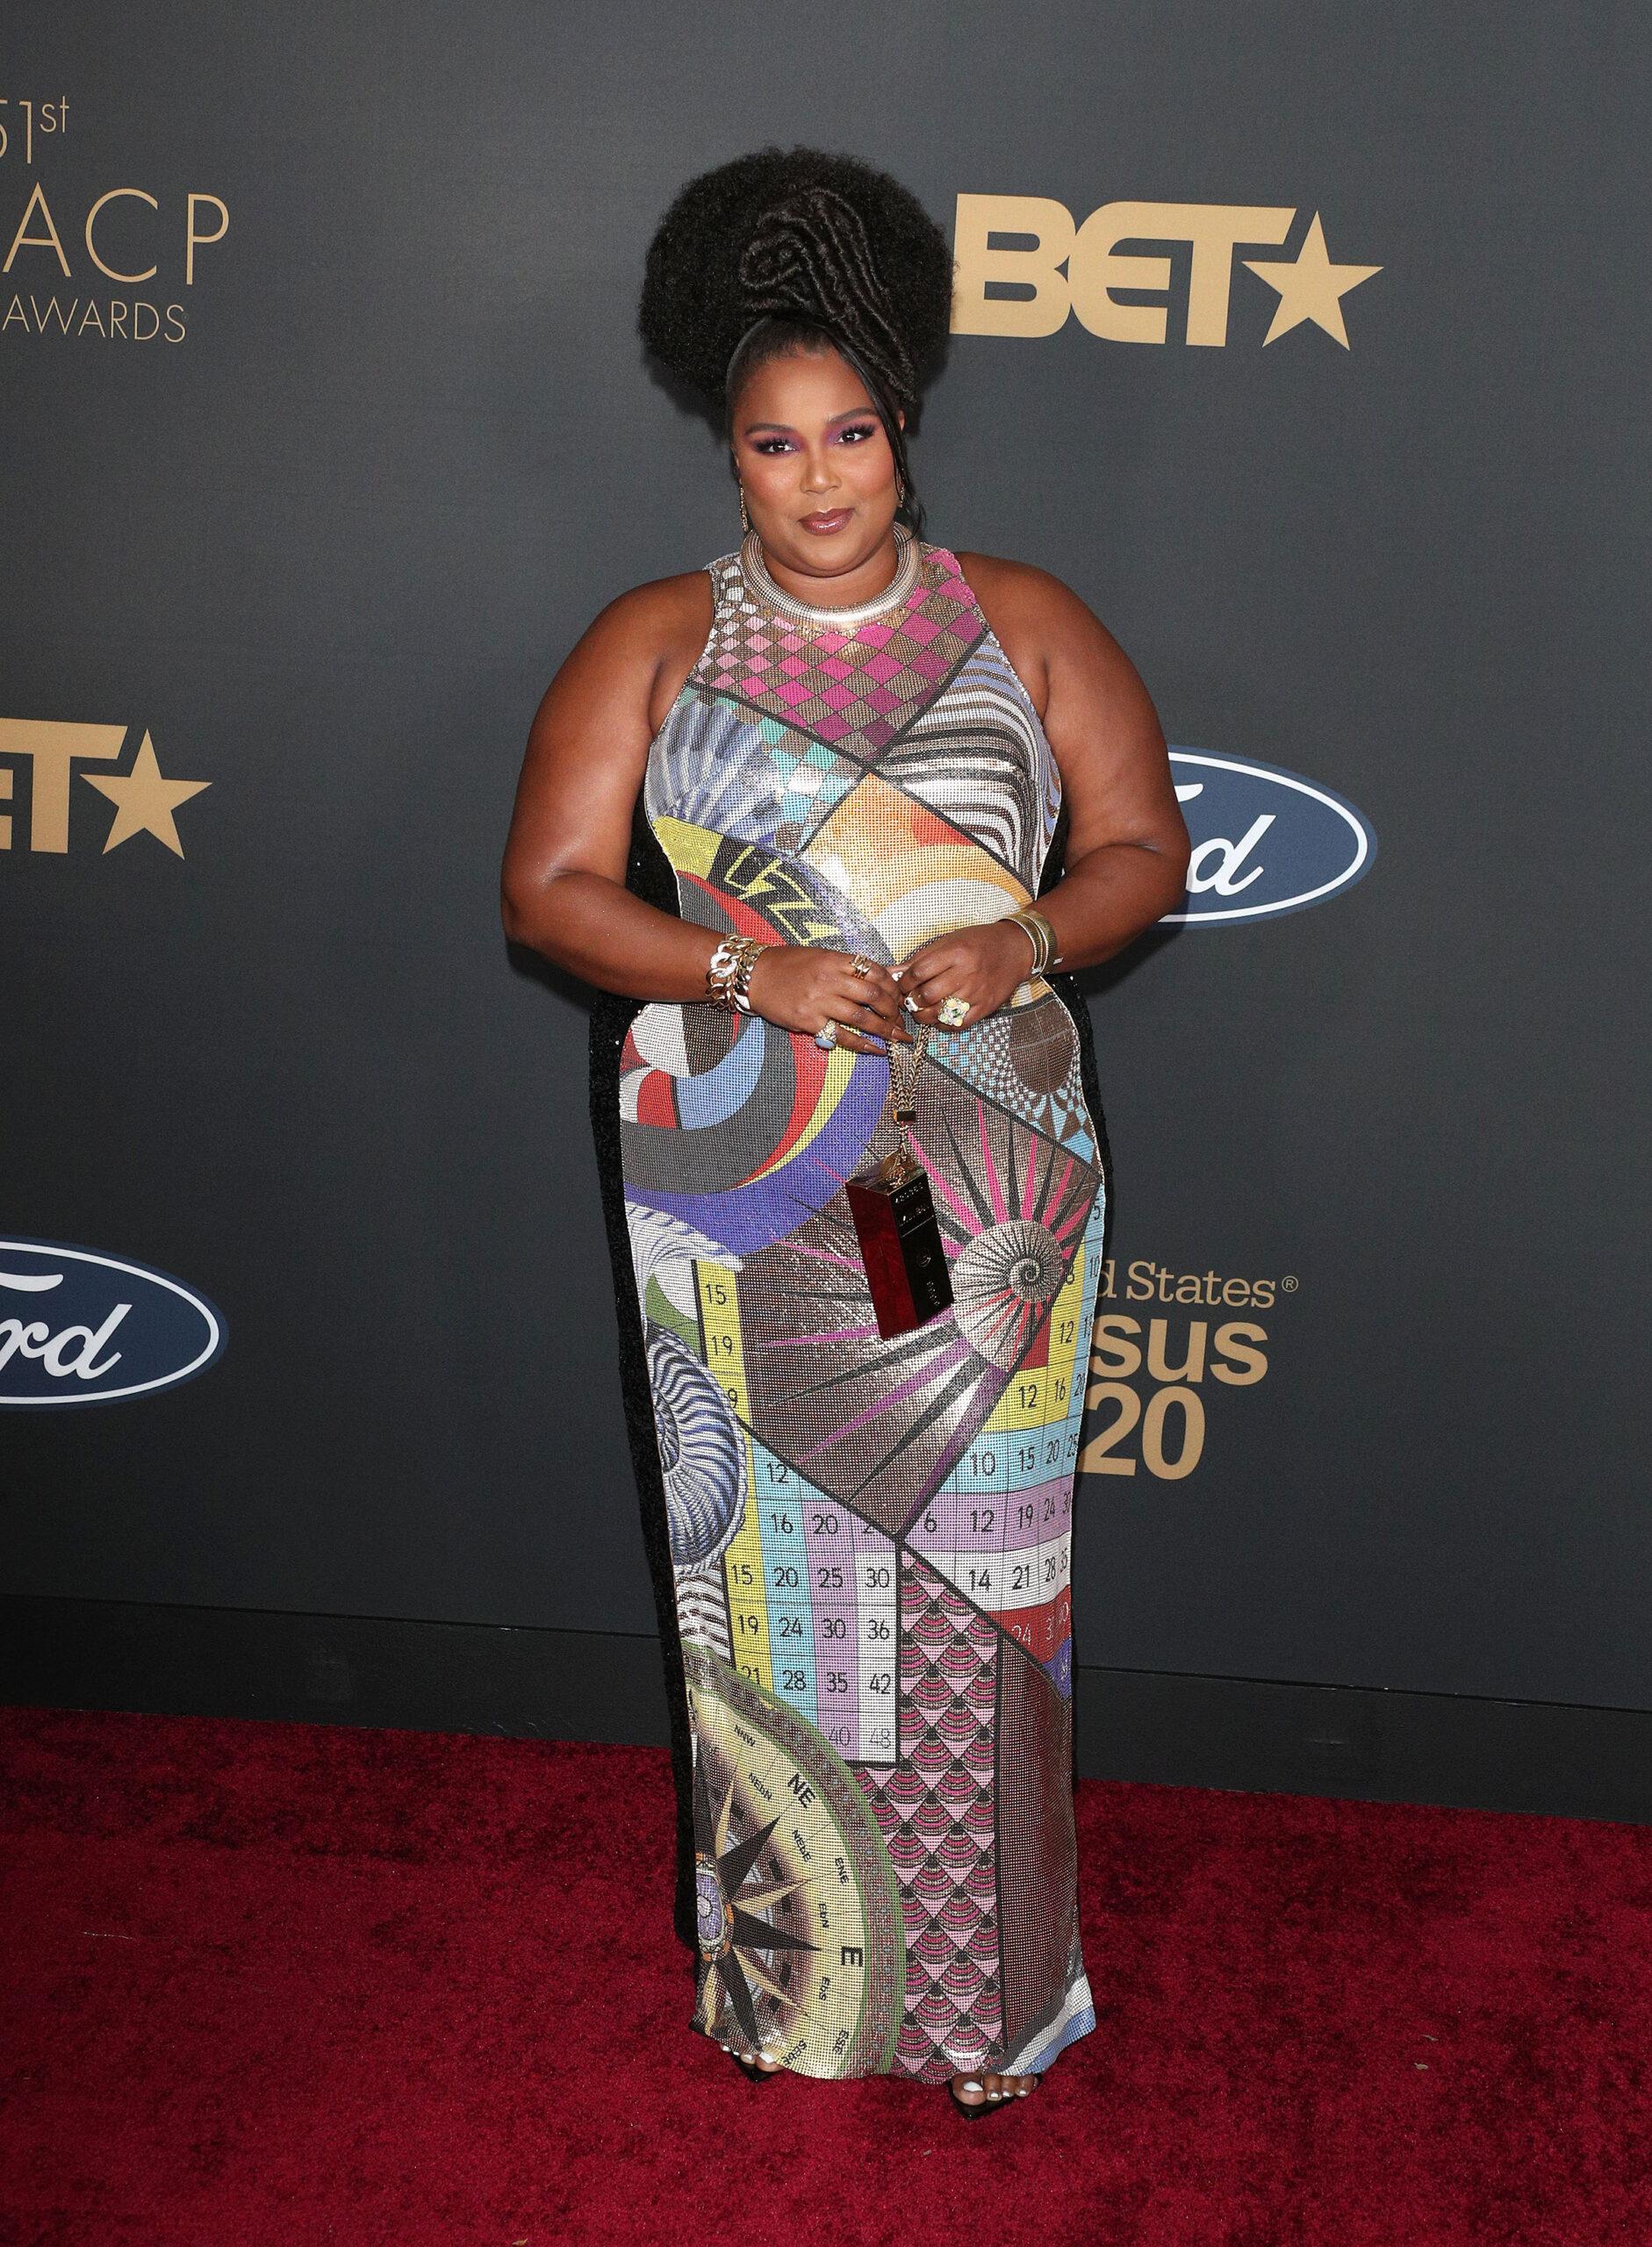 Lizzo at the 51st NAACP Image Awards - Arrivals